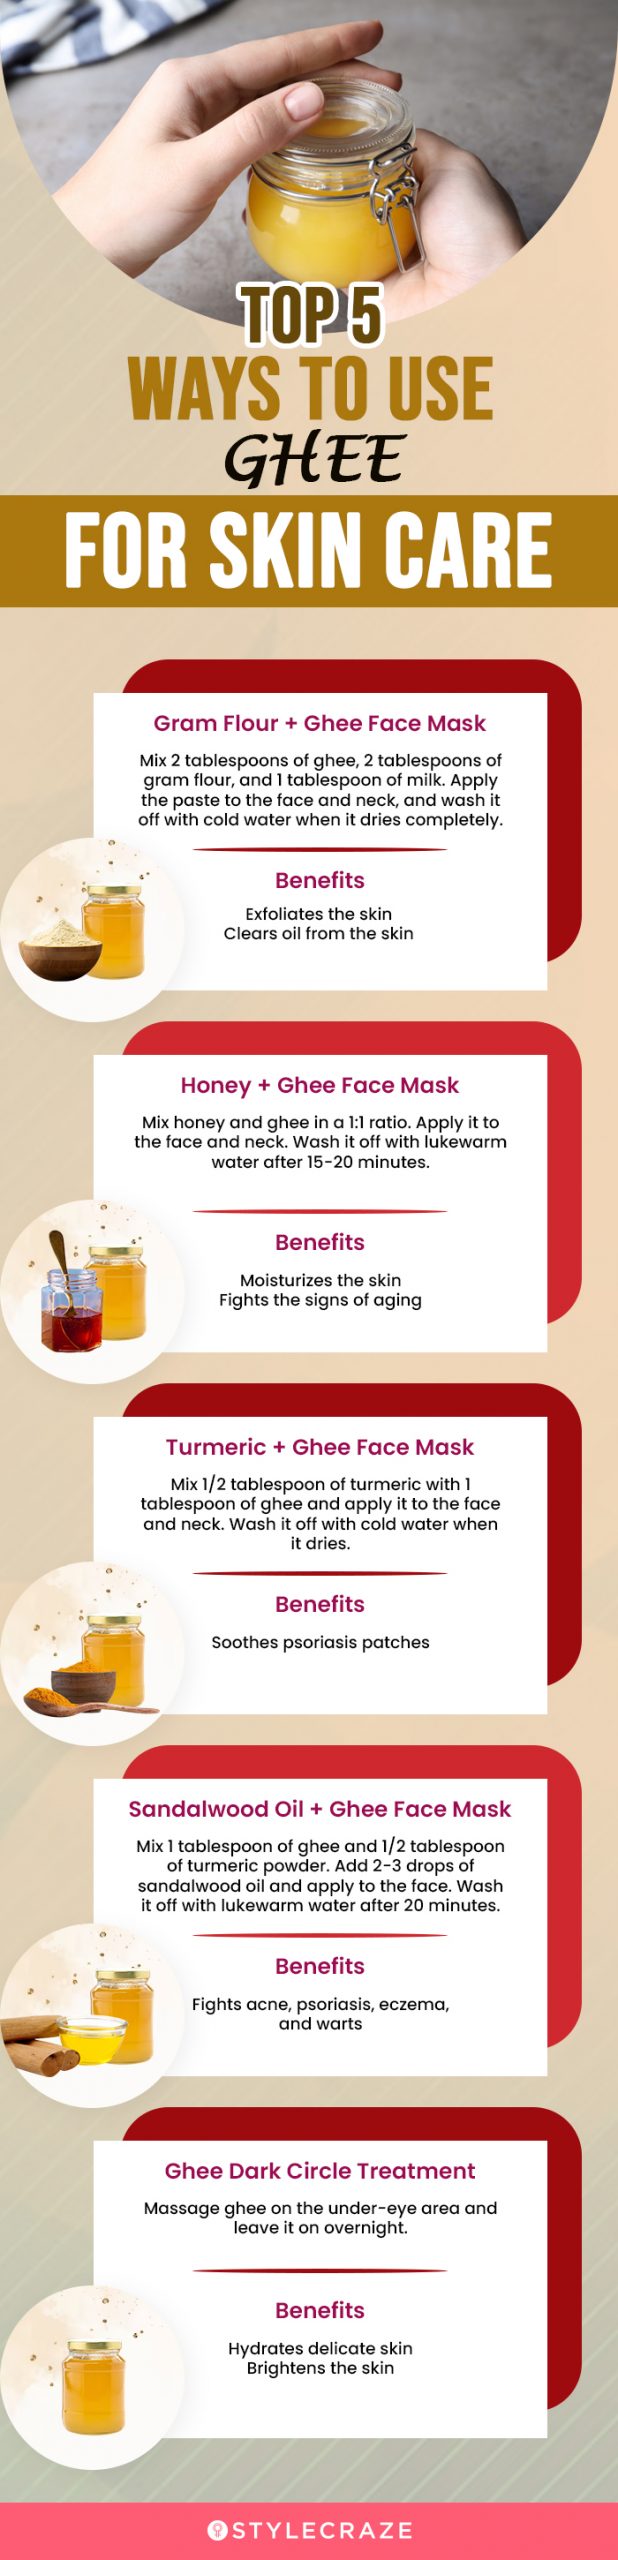 top 5 ways to use ghee for skin care (infographic)